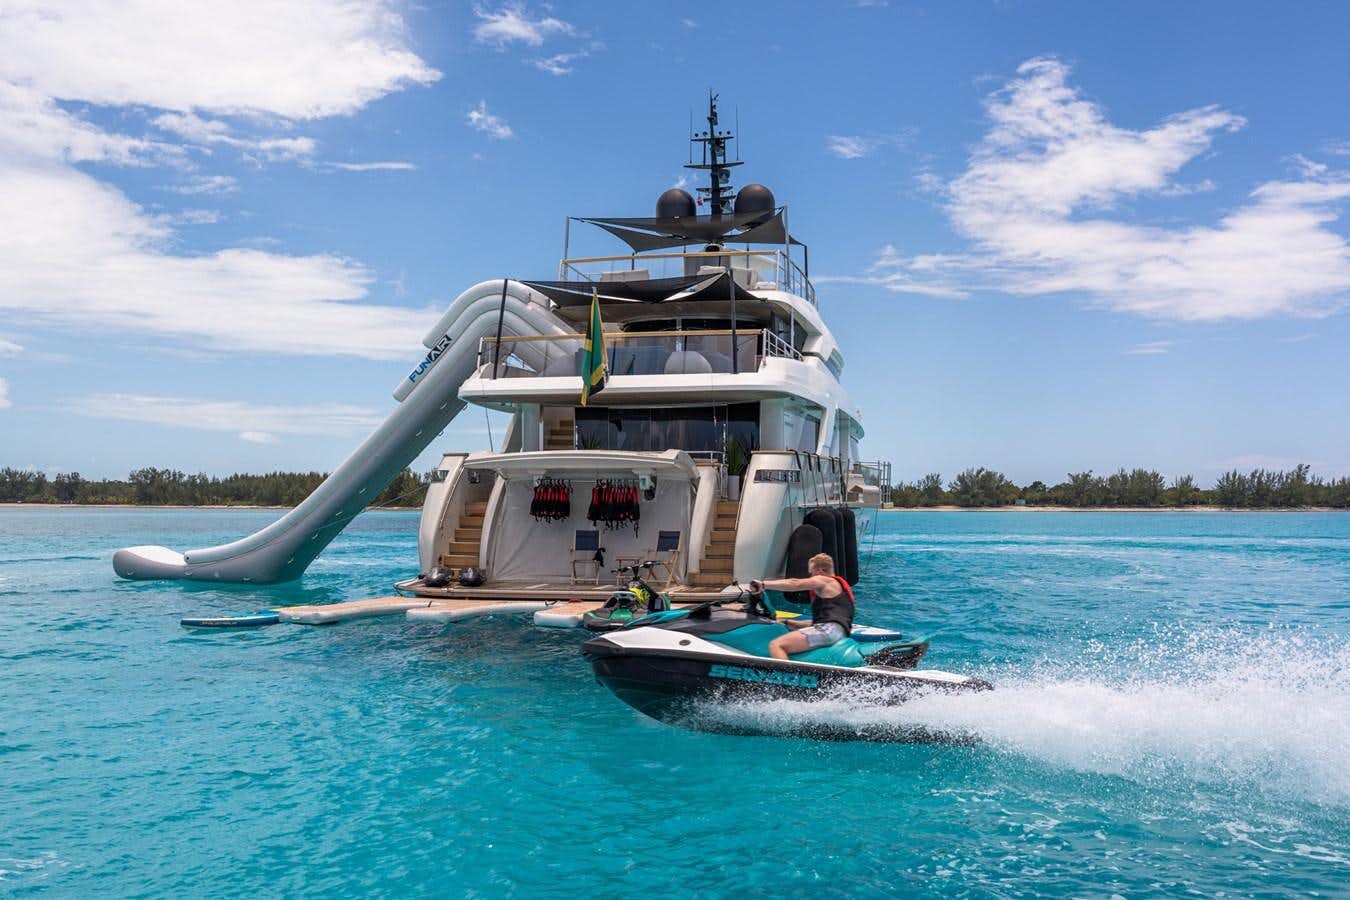 Halcyon
Yacht for Sale